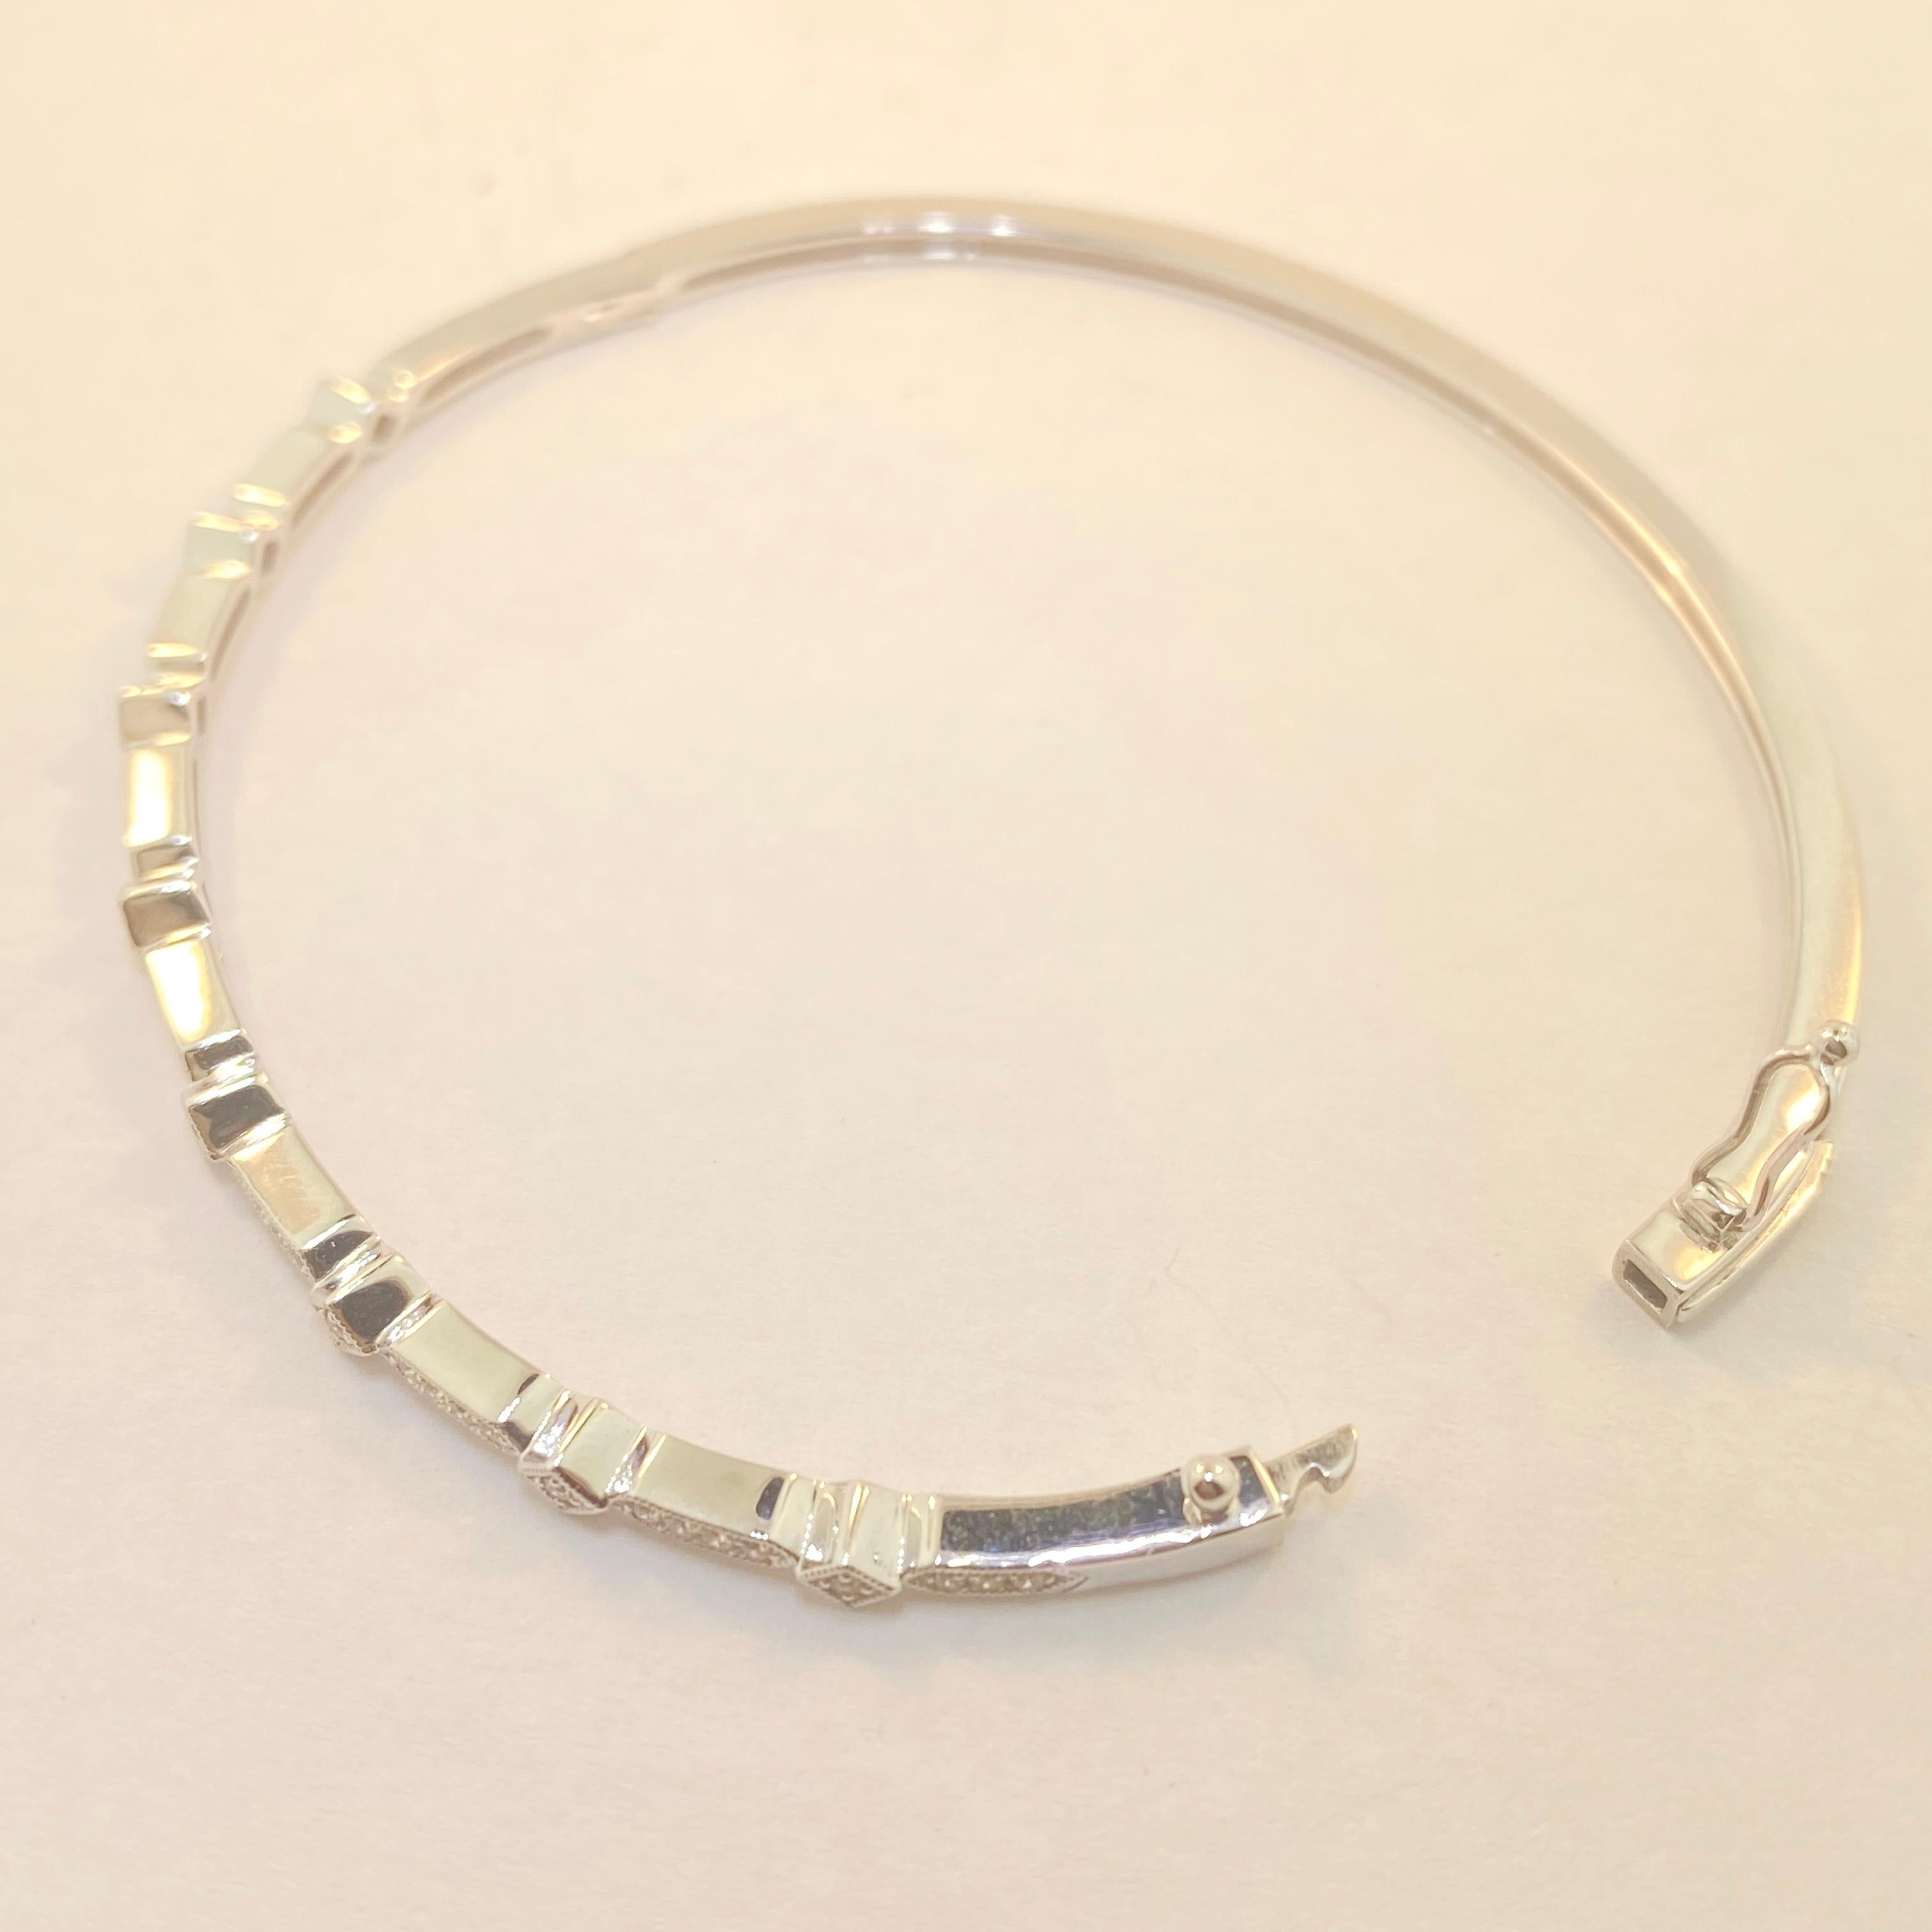 This precious bangle bracelet is dainty but such a stunning piece! It is made of solid 14 karat white gold with diamond embellishments on the top of the bangle!  The bracelet is really easy to put on as it has a hinge on one side and a hidden safety